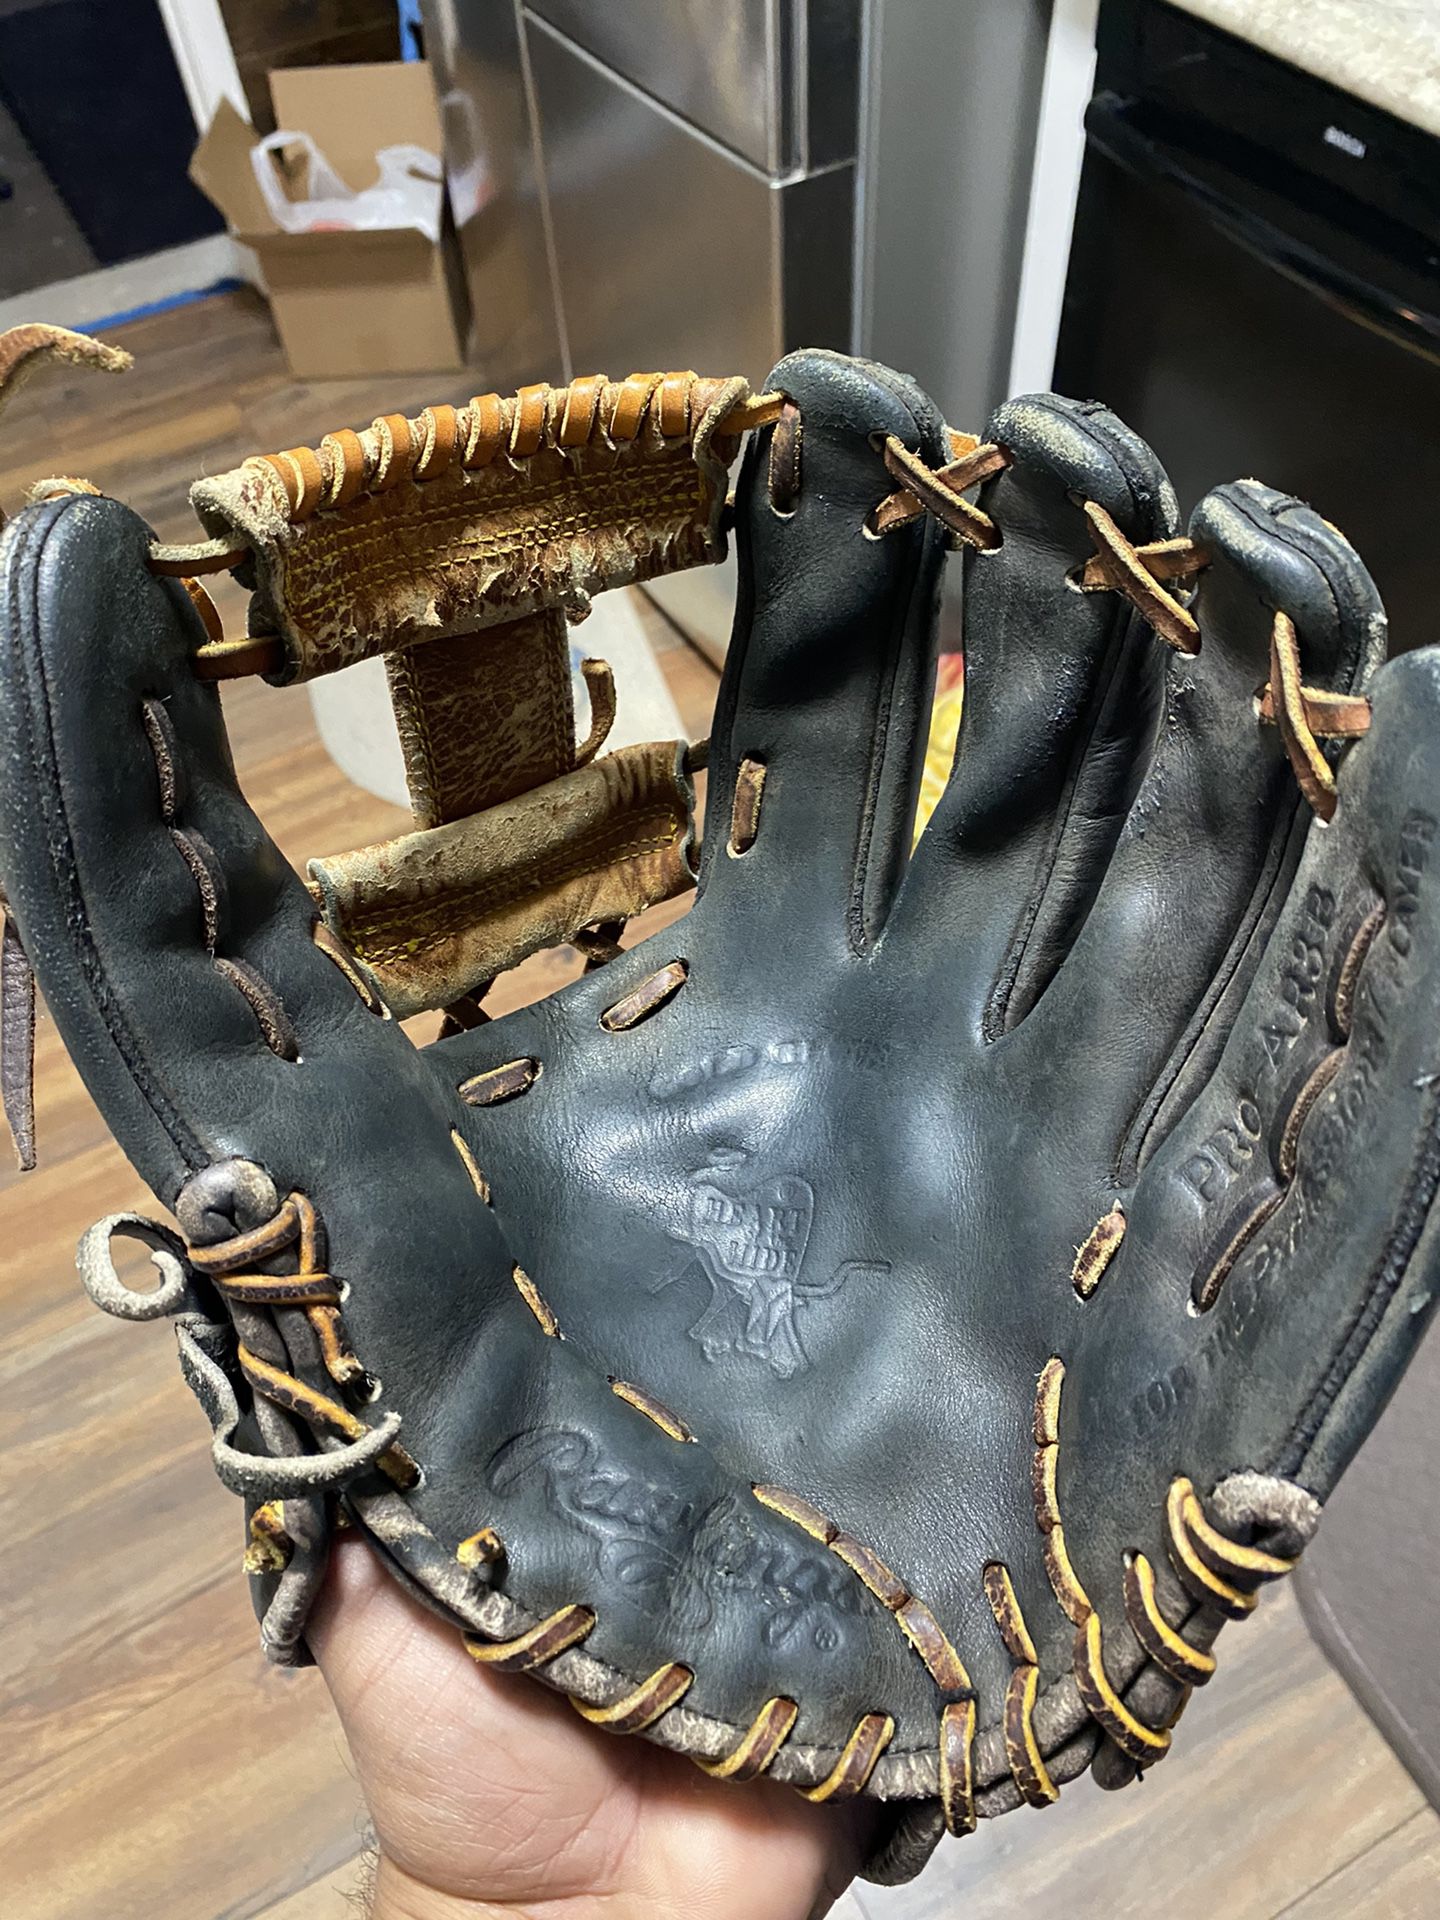 Glove Rawlings Heart Of The Hide Pro-AR3 11.75”